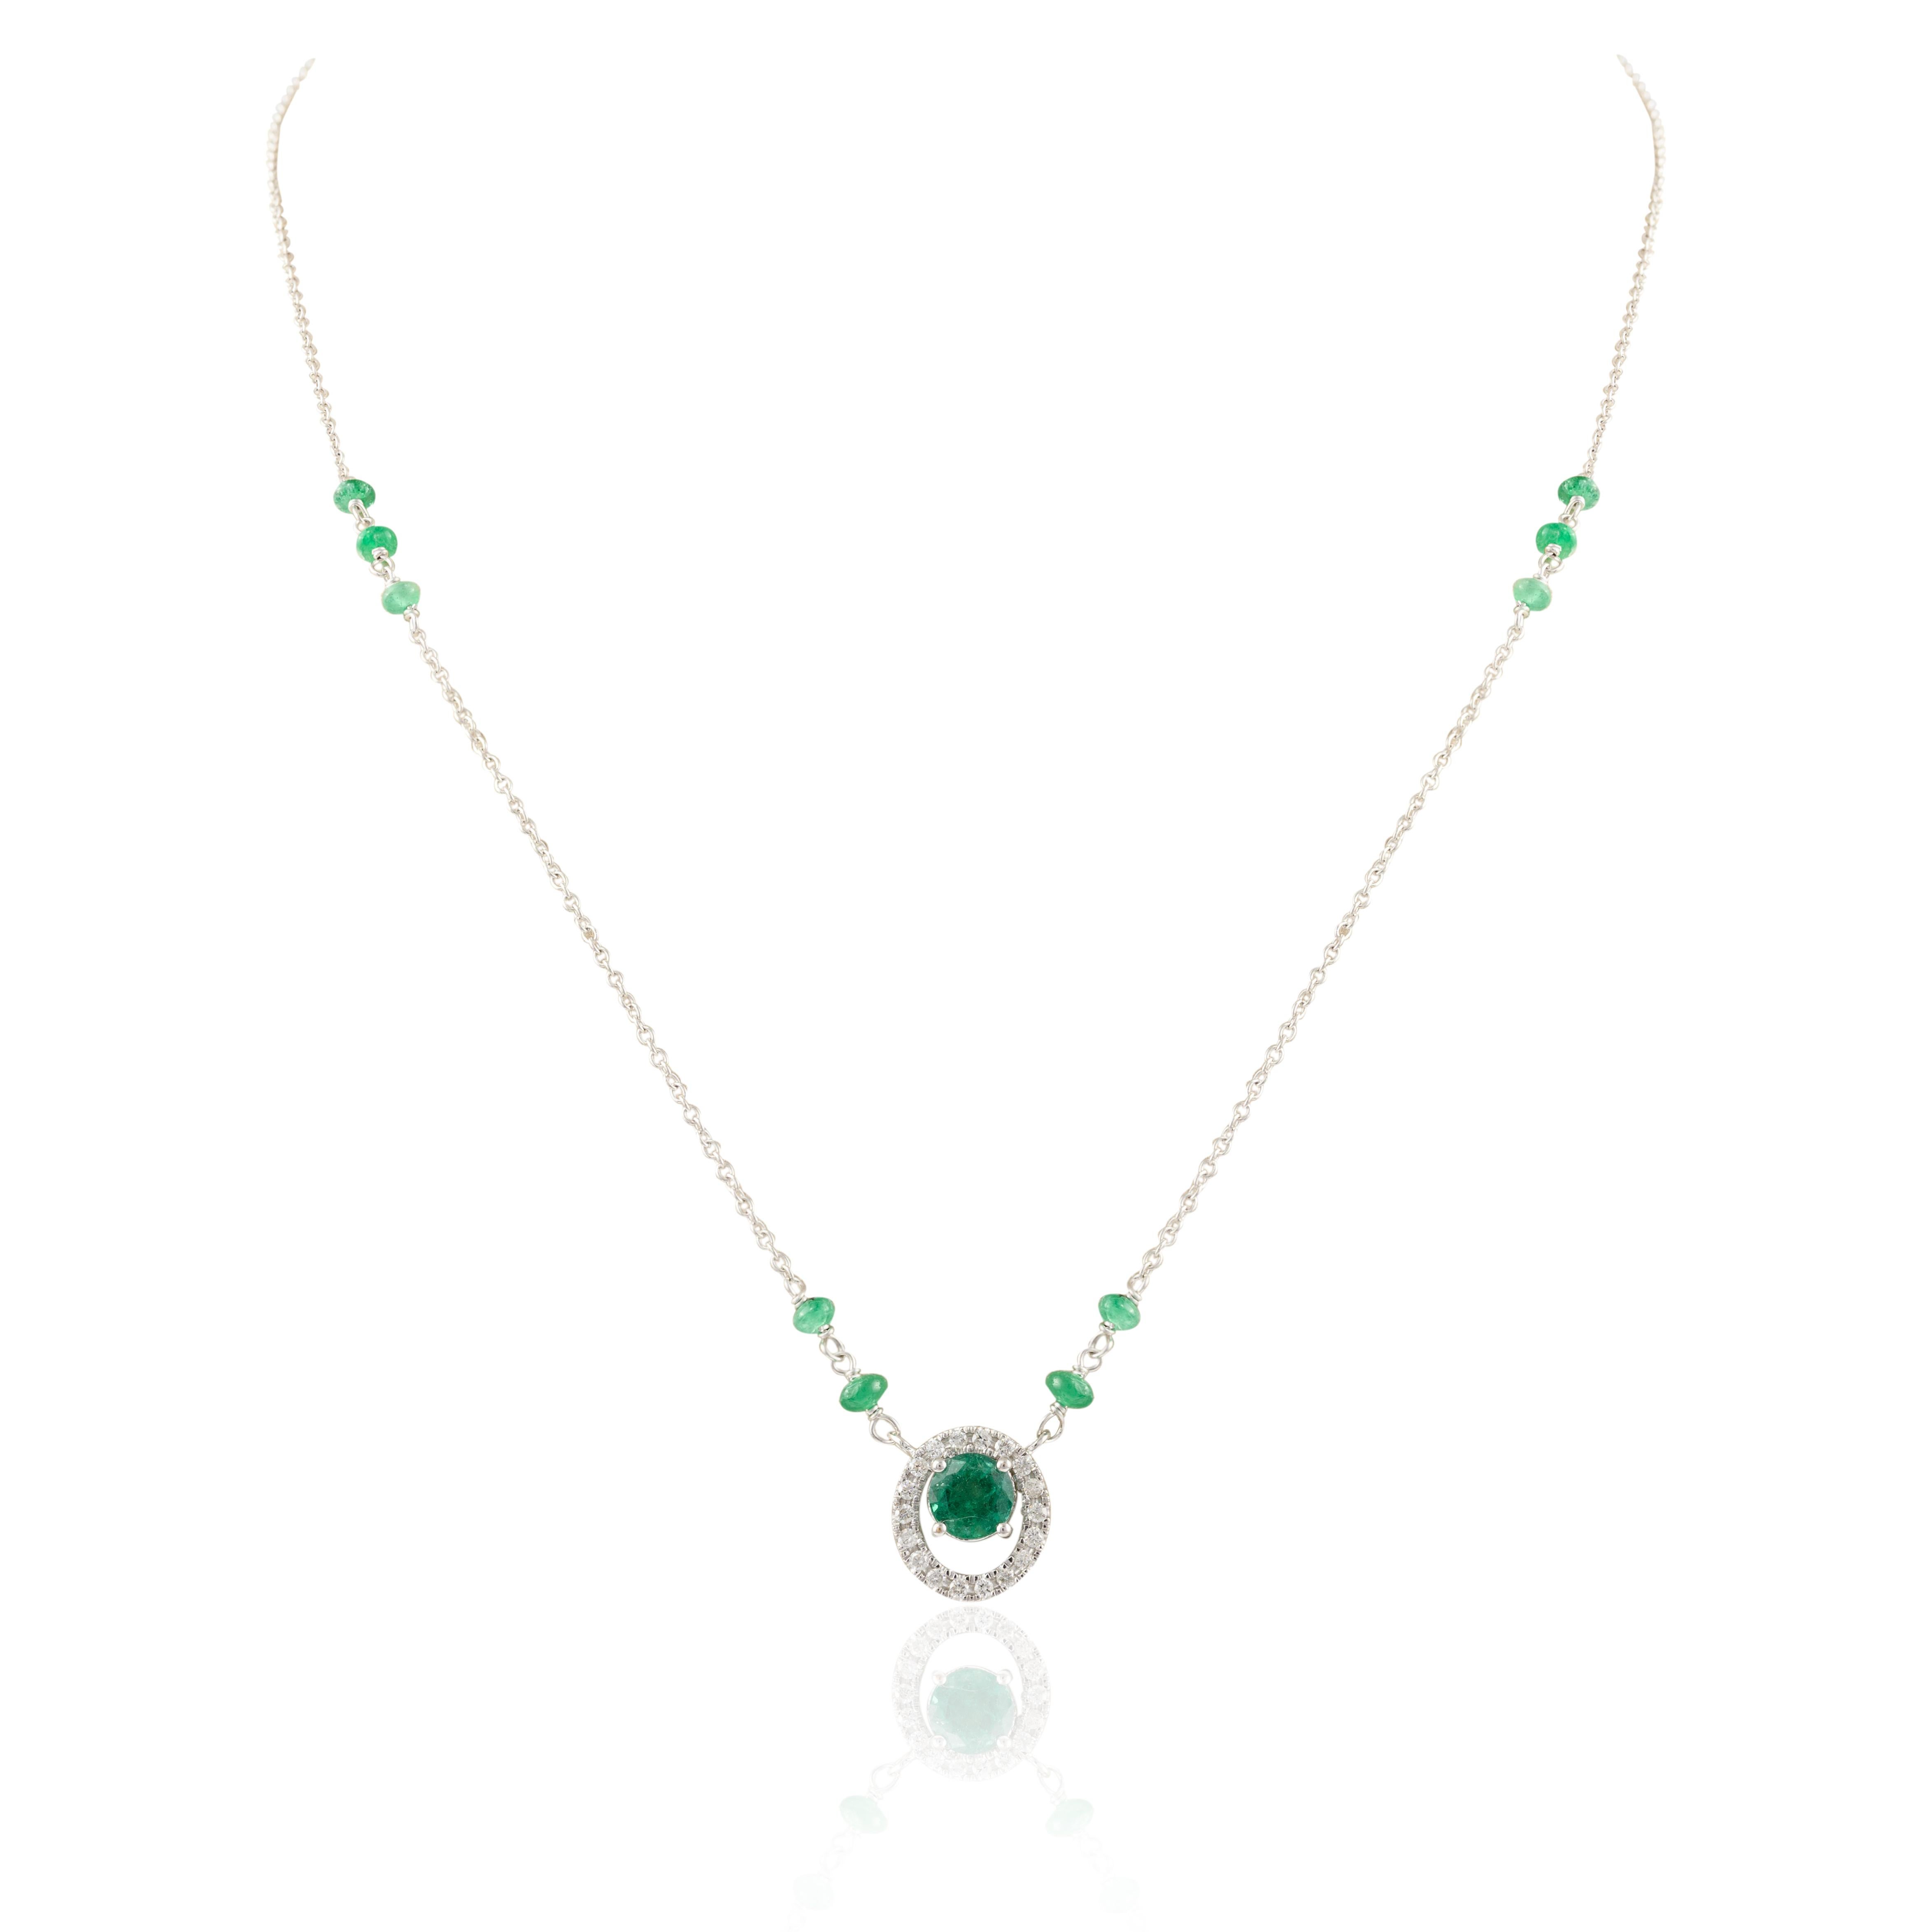 Round Cut Everyday Emerald Diamond Necklace 18k Solid White Gold, Fine Jewelry Gift For Sale